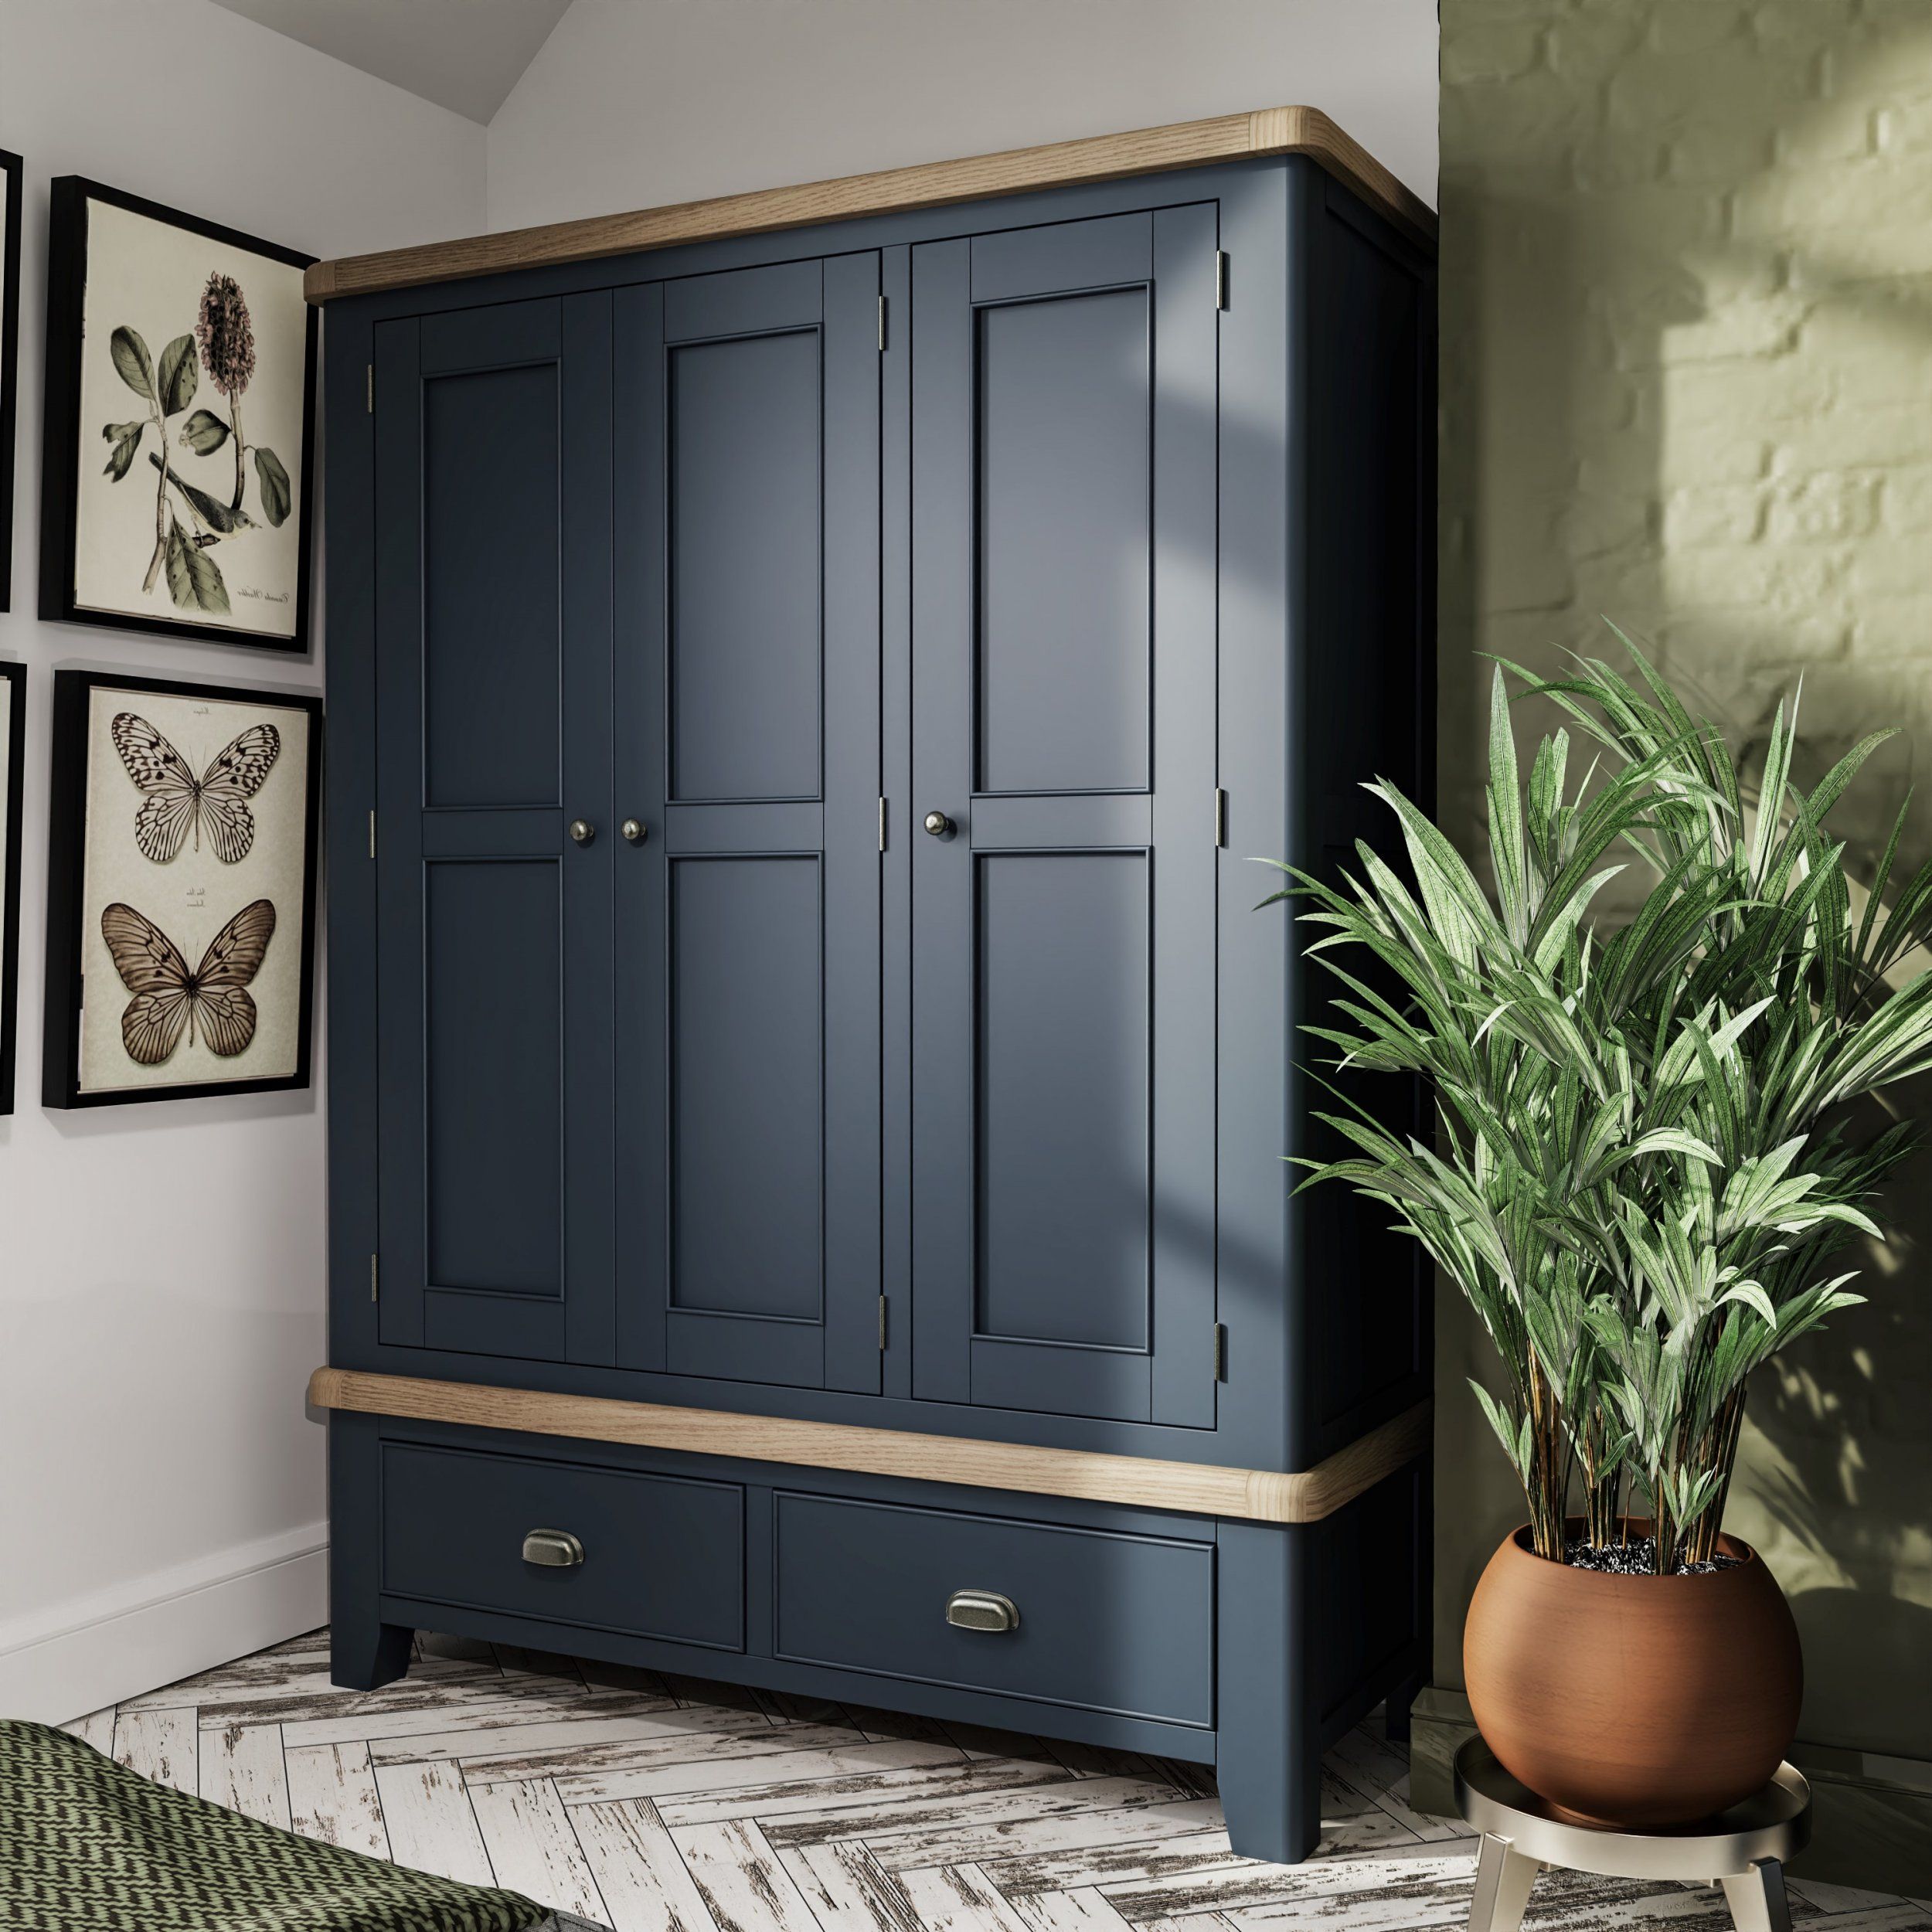 Haxby Oak Painted Bedroom 3 Door Wardrobe – Blue | The Clearance Zone With Cheap 3 Door Wardrobes (View 5 of 15)